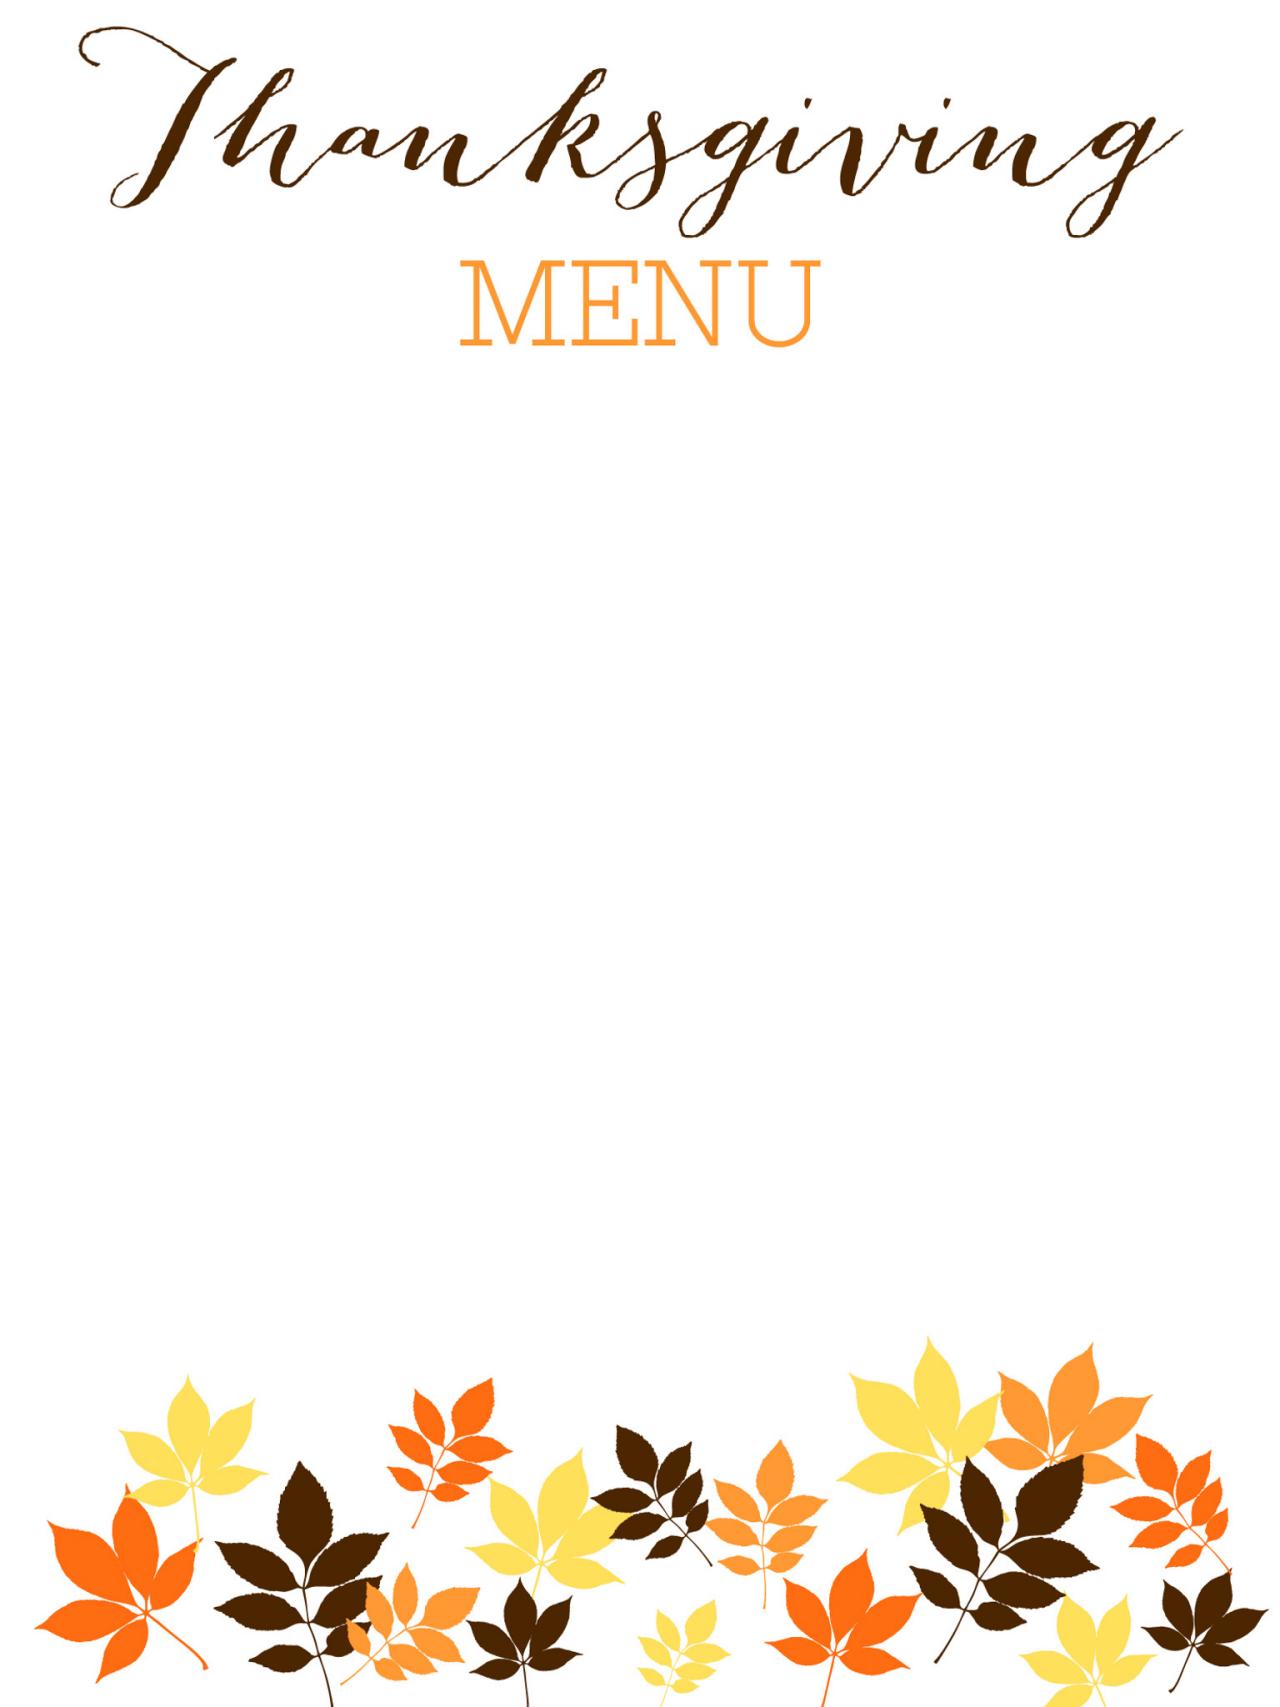 Free Thanksgiving Templates: 49 Place Cards Banners Crafts Decor